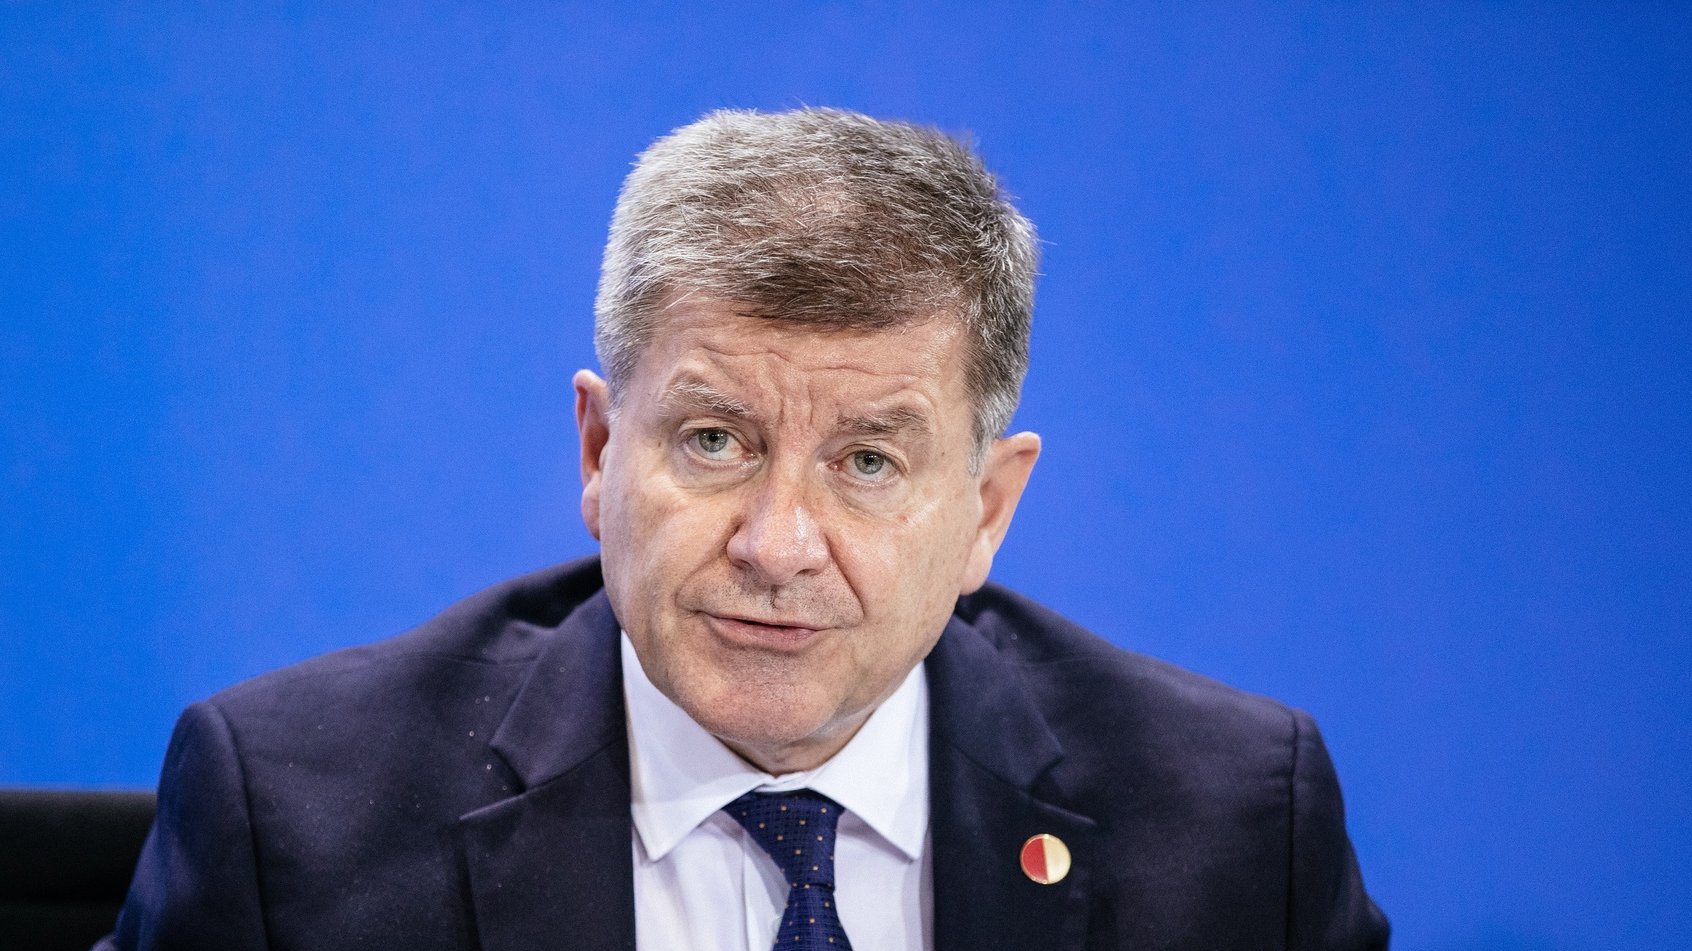 epa07886692 Director-General of the International Labour Organization (ILO) Guy Ryder attends a press conference at the German chancellery in Berlin, Germany, 01 October 2019.  EPA/HAYOUNG JEON